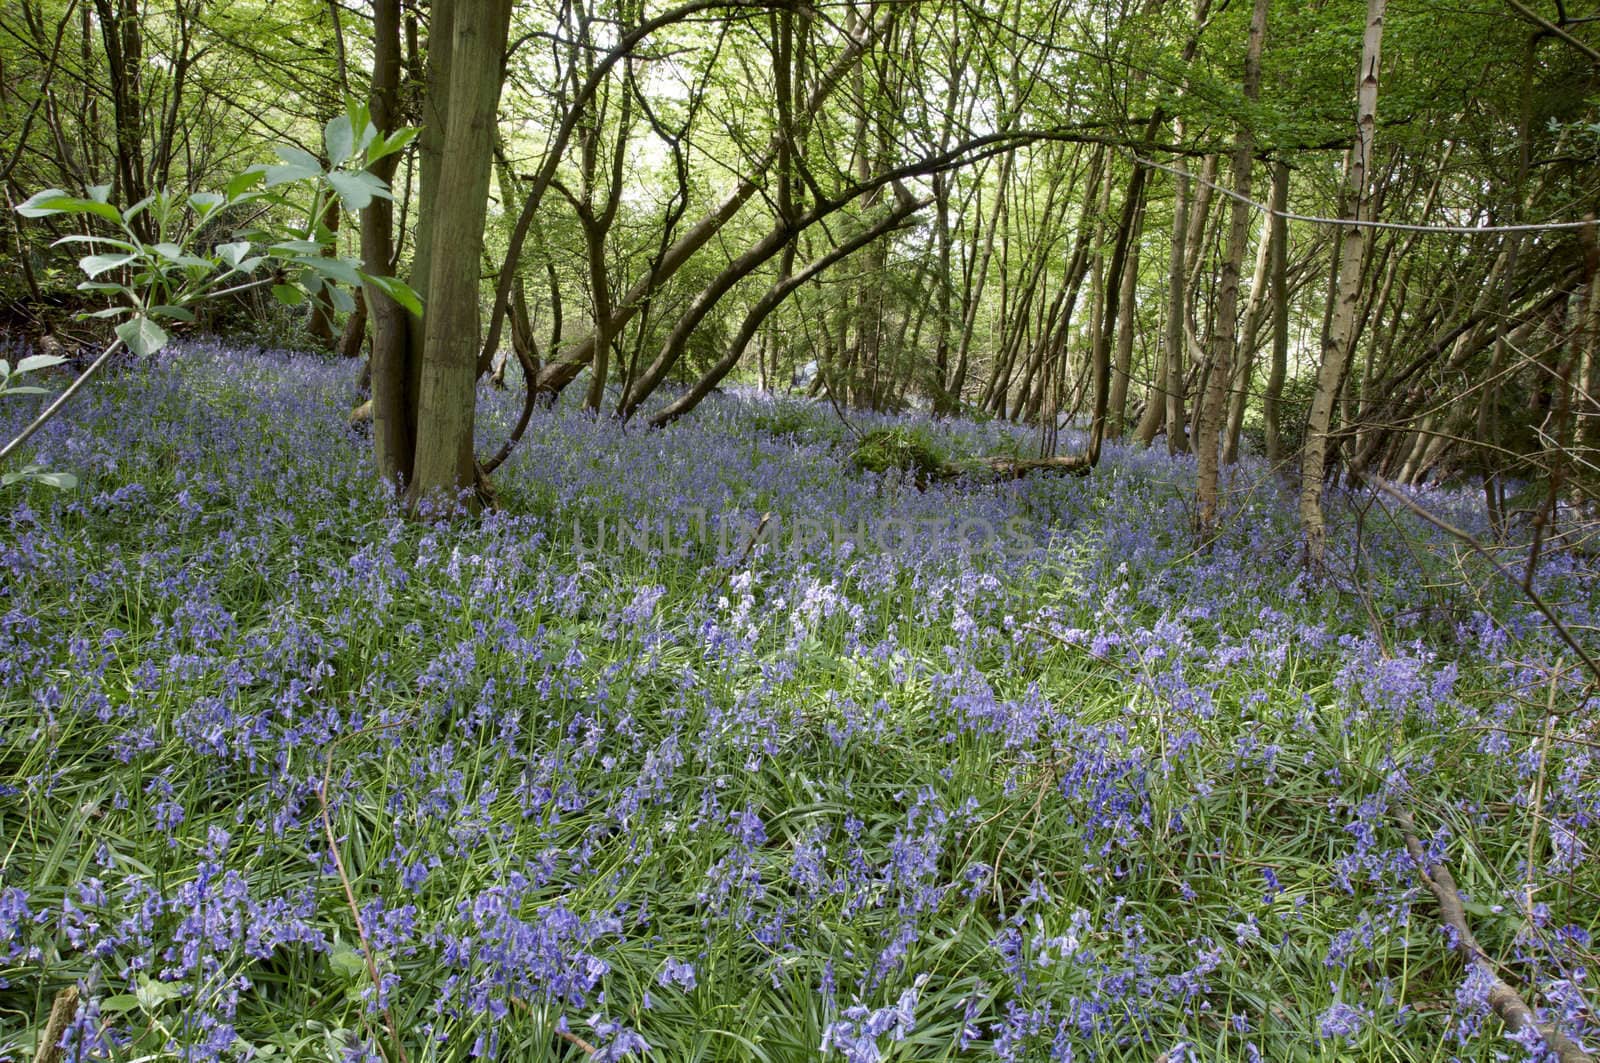 A view of bluebells in a wood at spring time